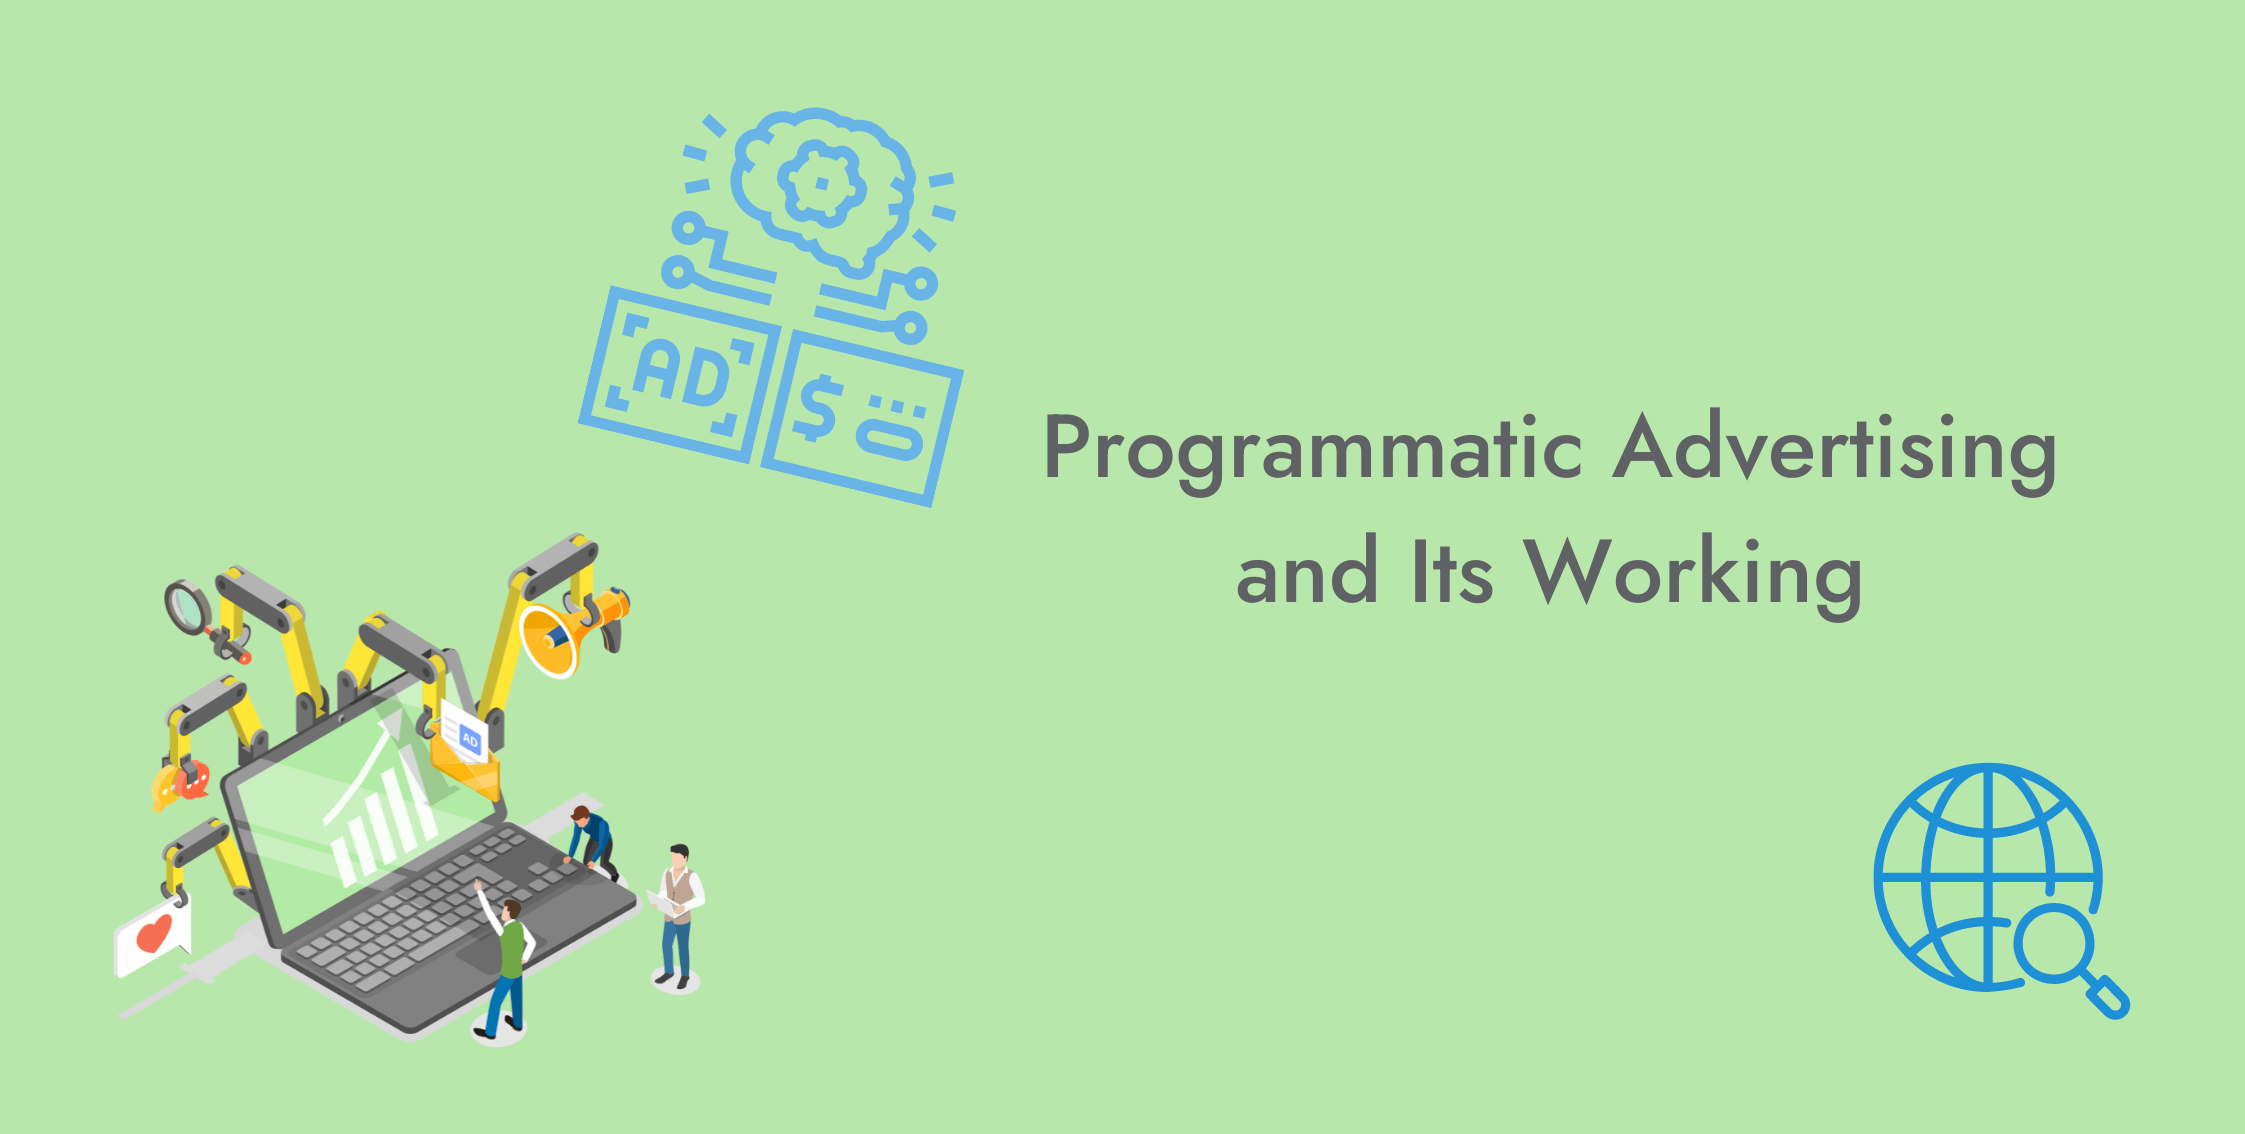 What Does Programmatic Advertising Mean & How Does It Work?